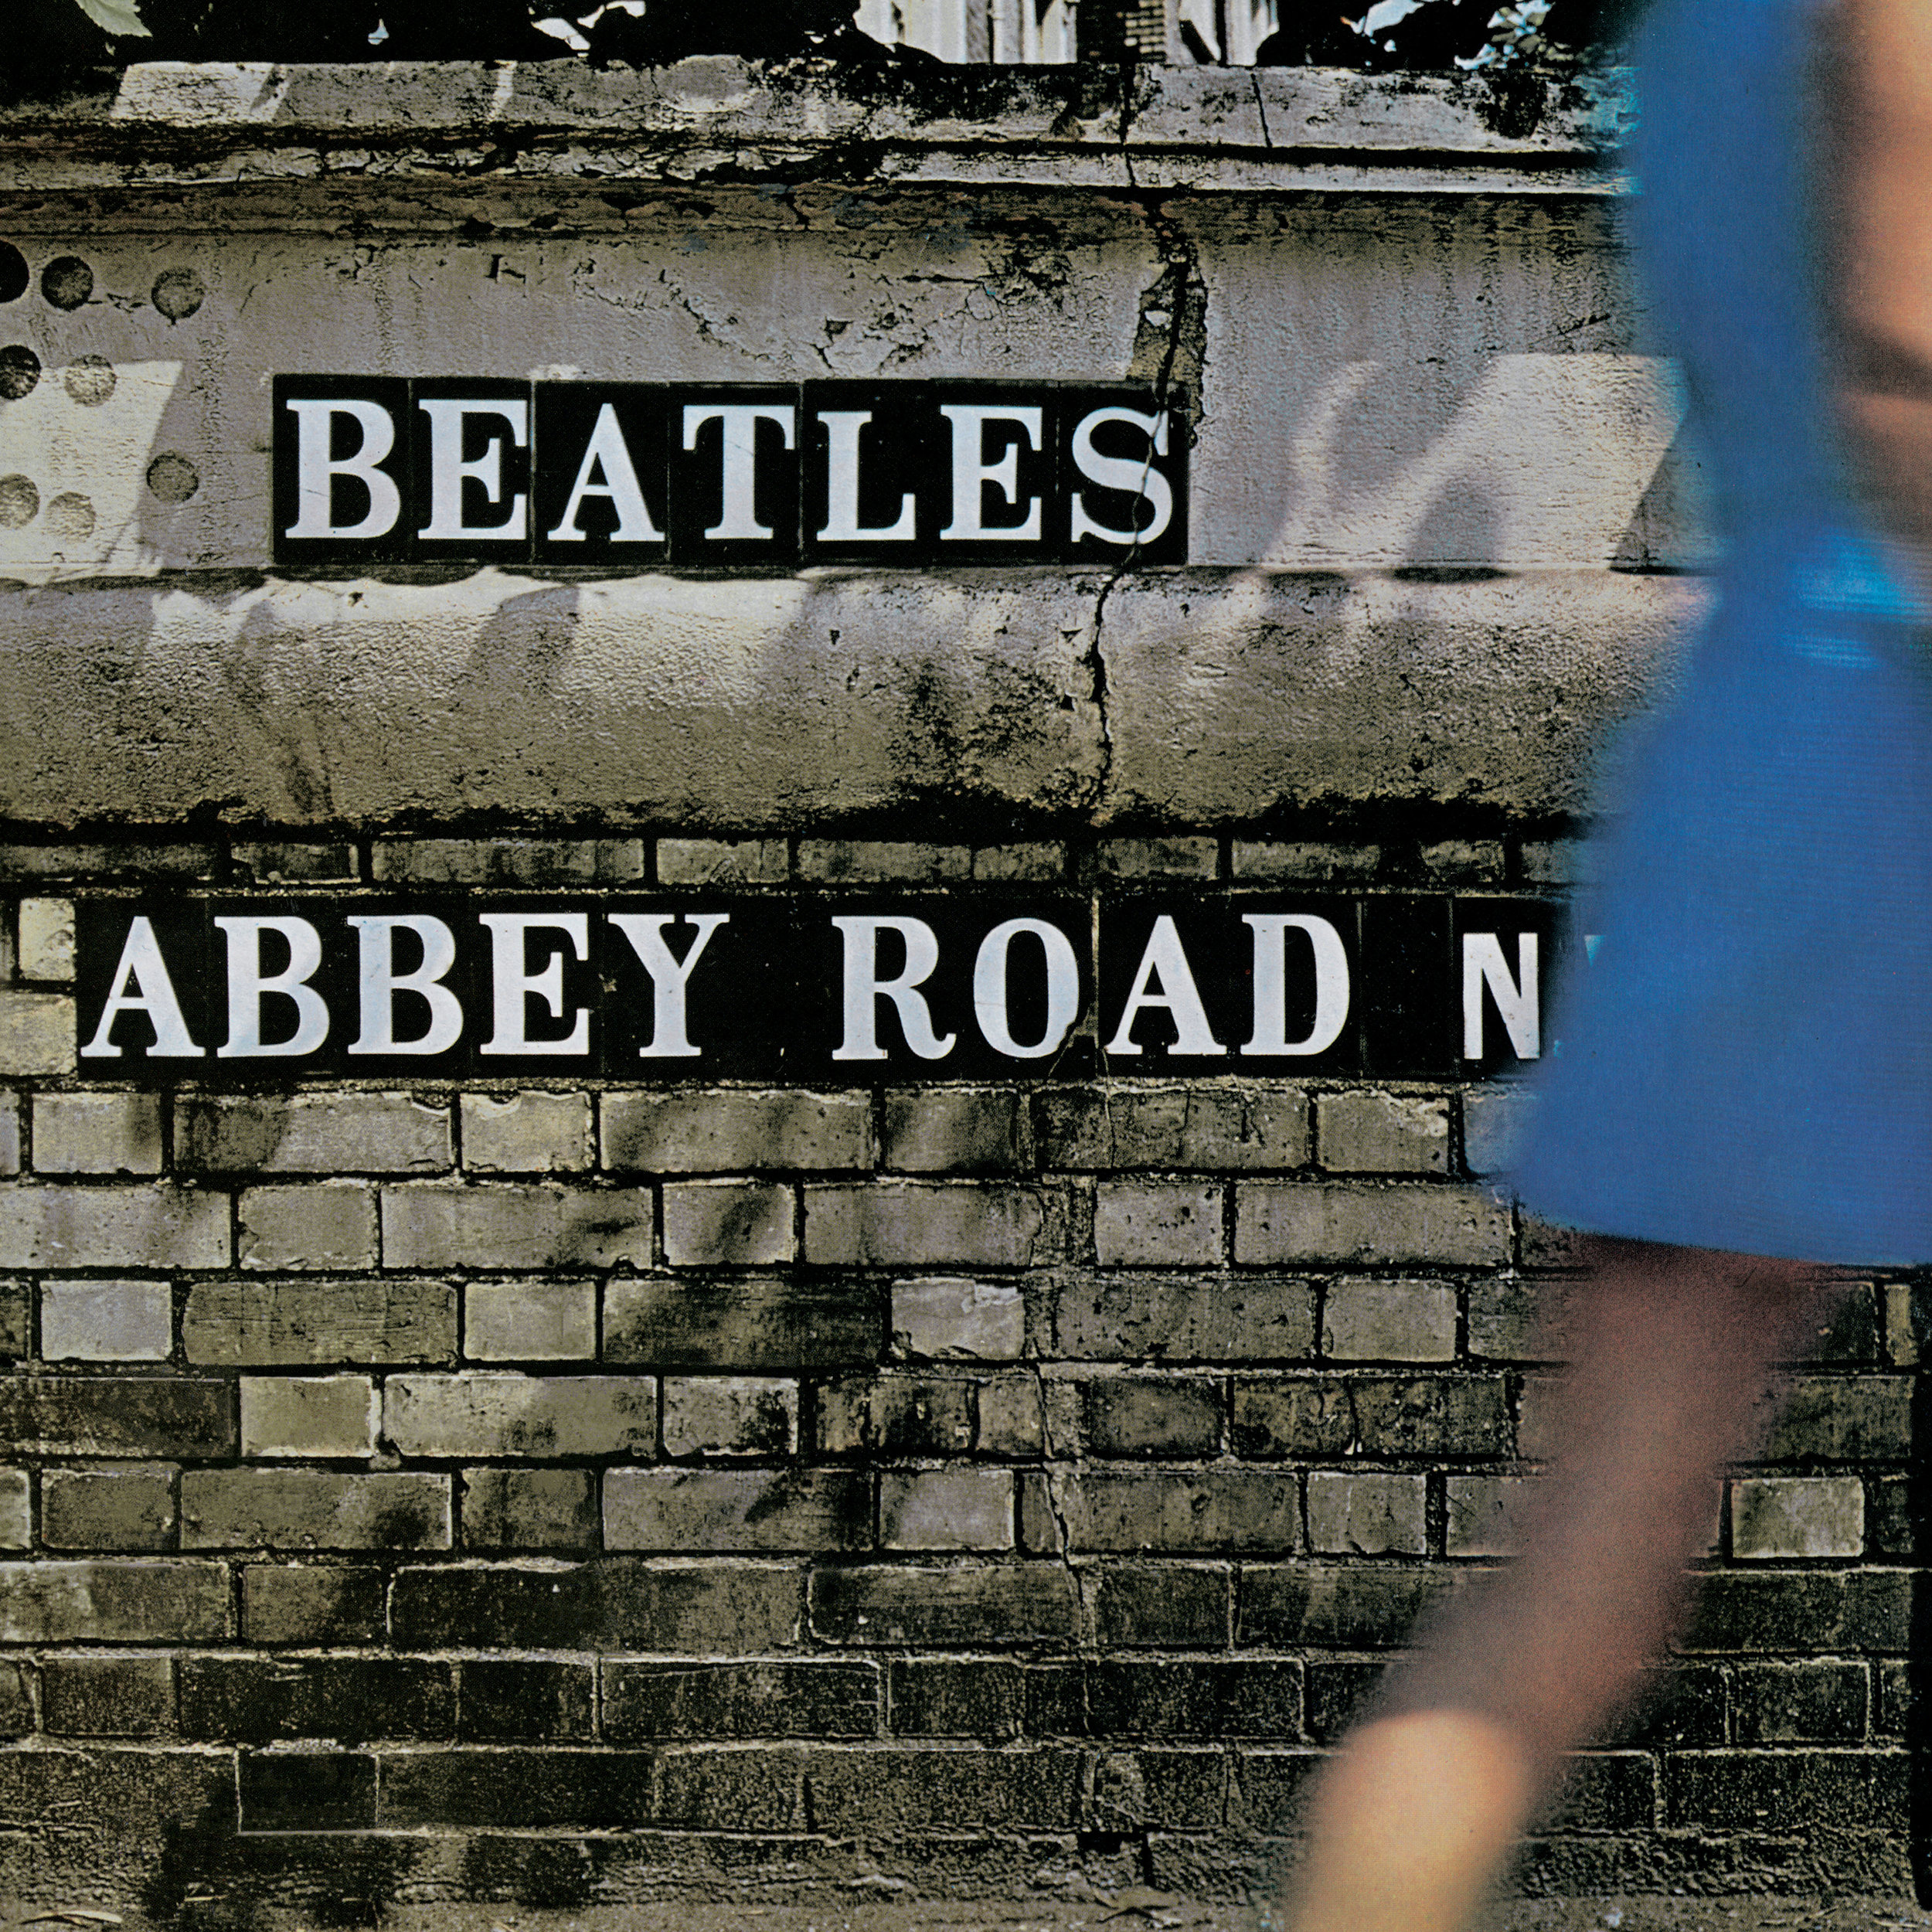 RS322_AbbeyRoad_backcover_notext.jpg